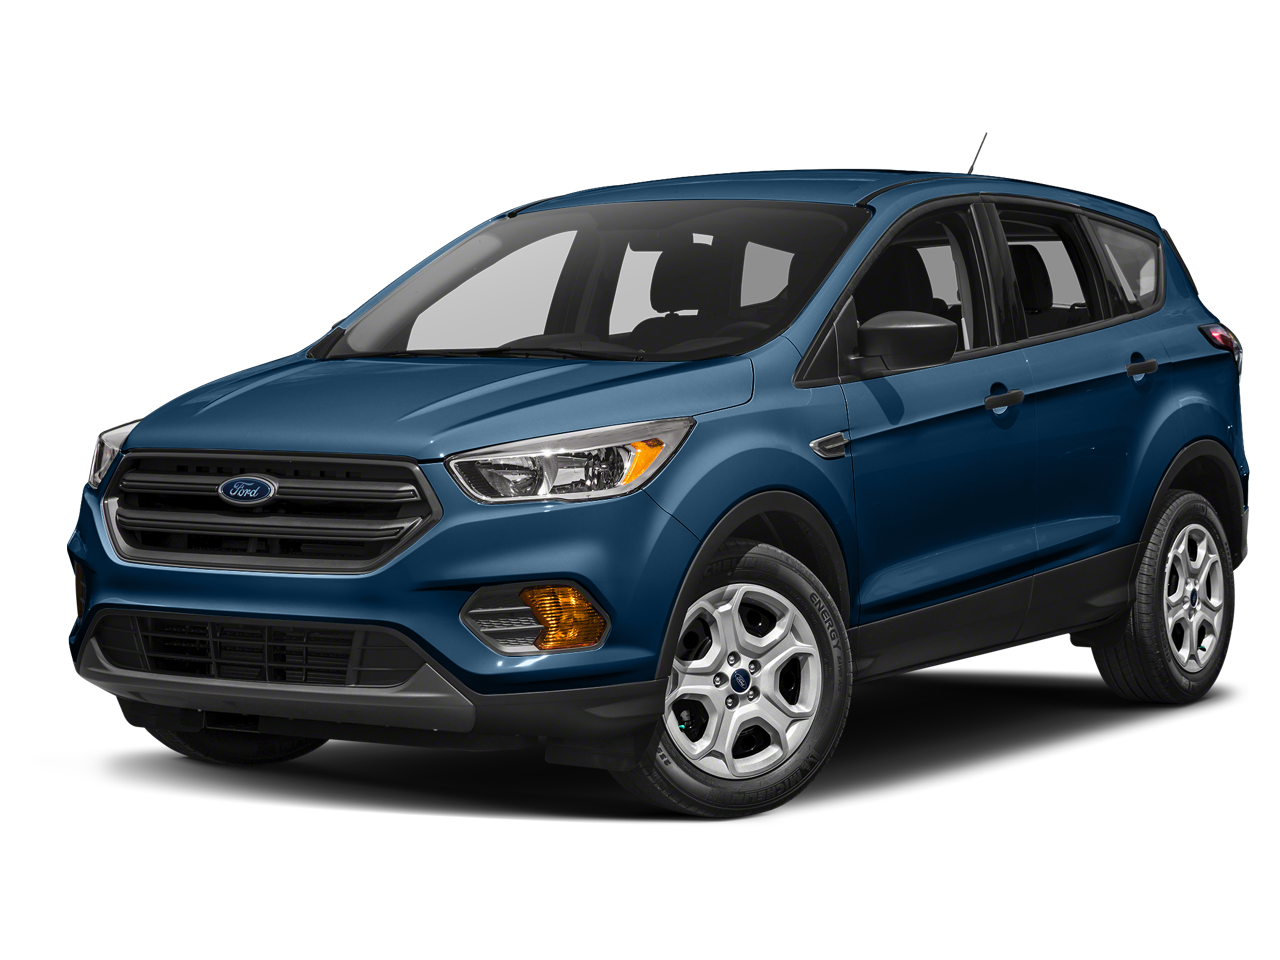 2019 Ford Escape SE 4X4 NAVIGATION HEATED LEATHER TRIMMED SEATS APPLE